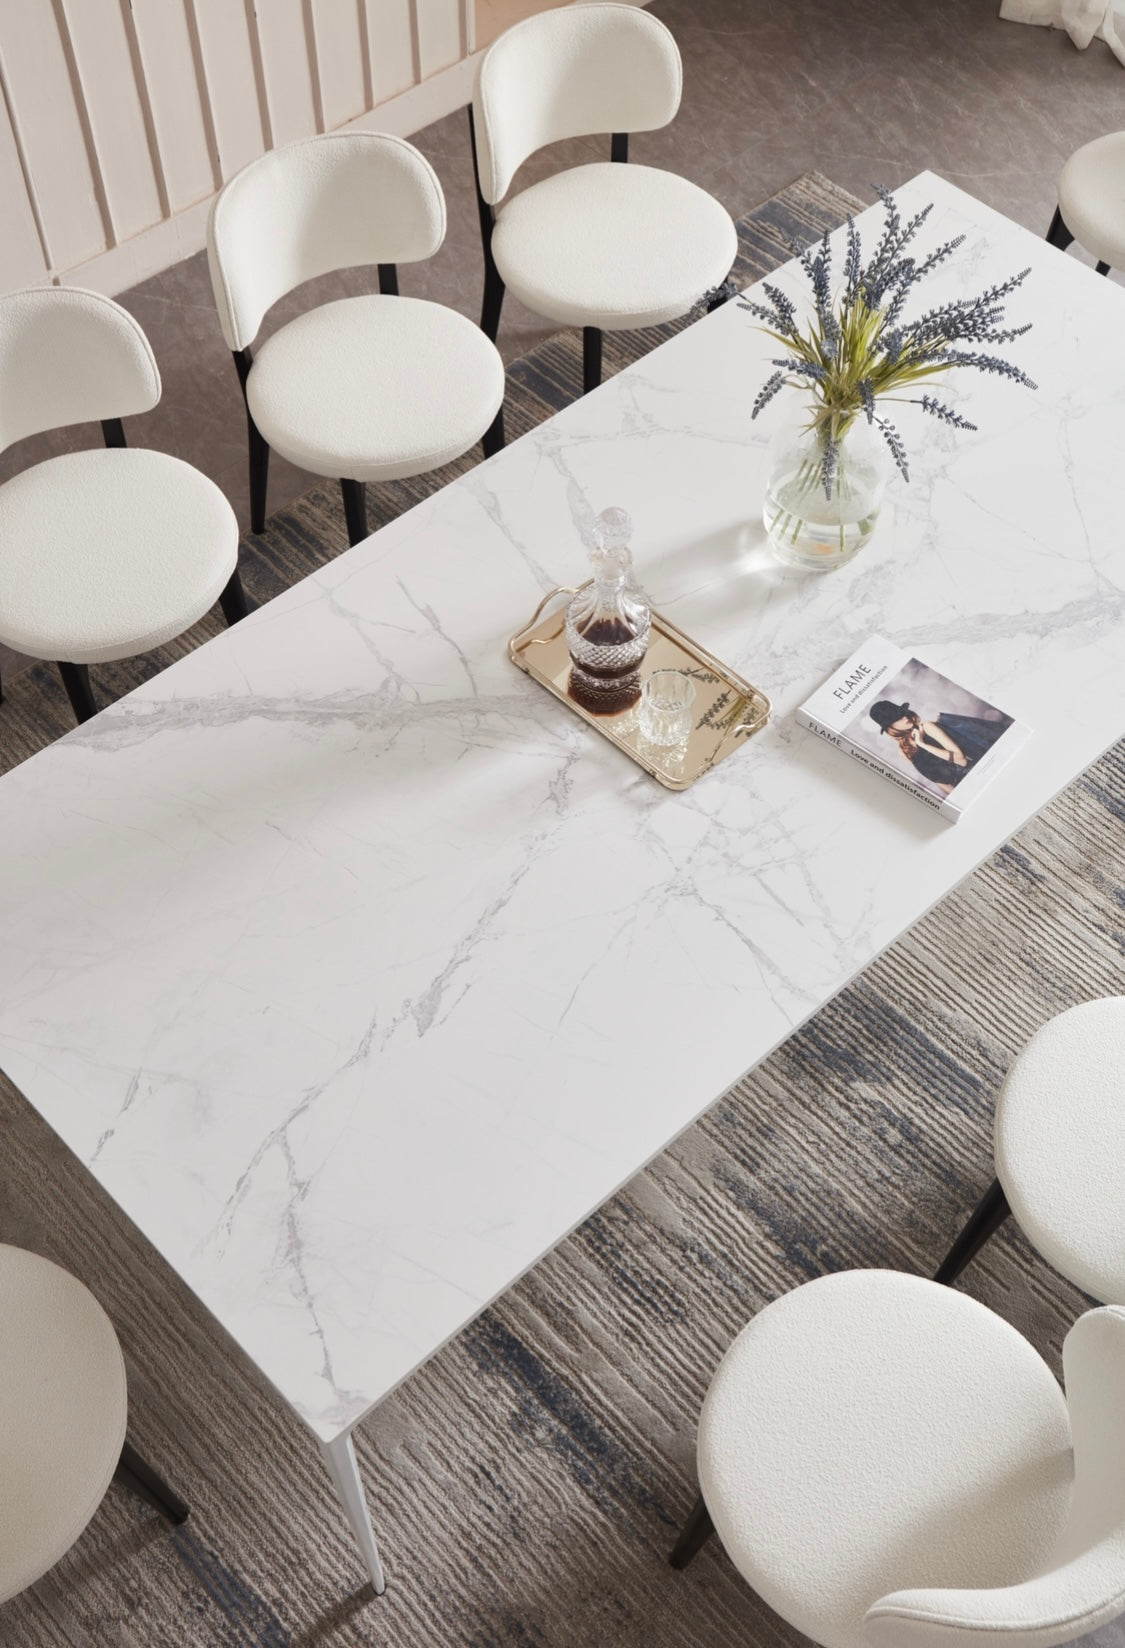 White Sintered stone stone Dining table